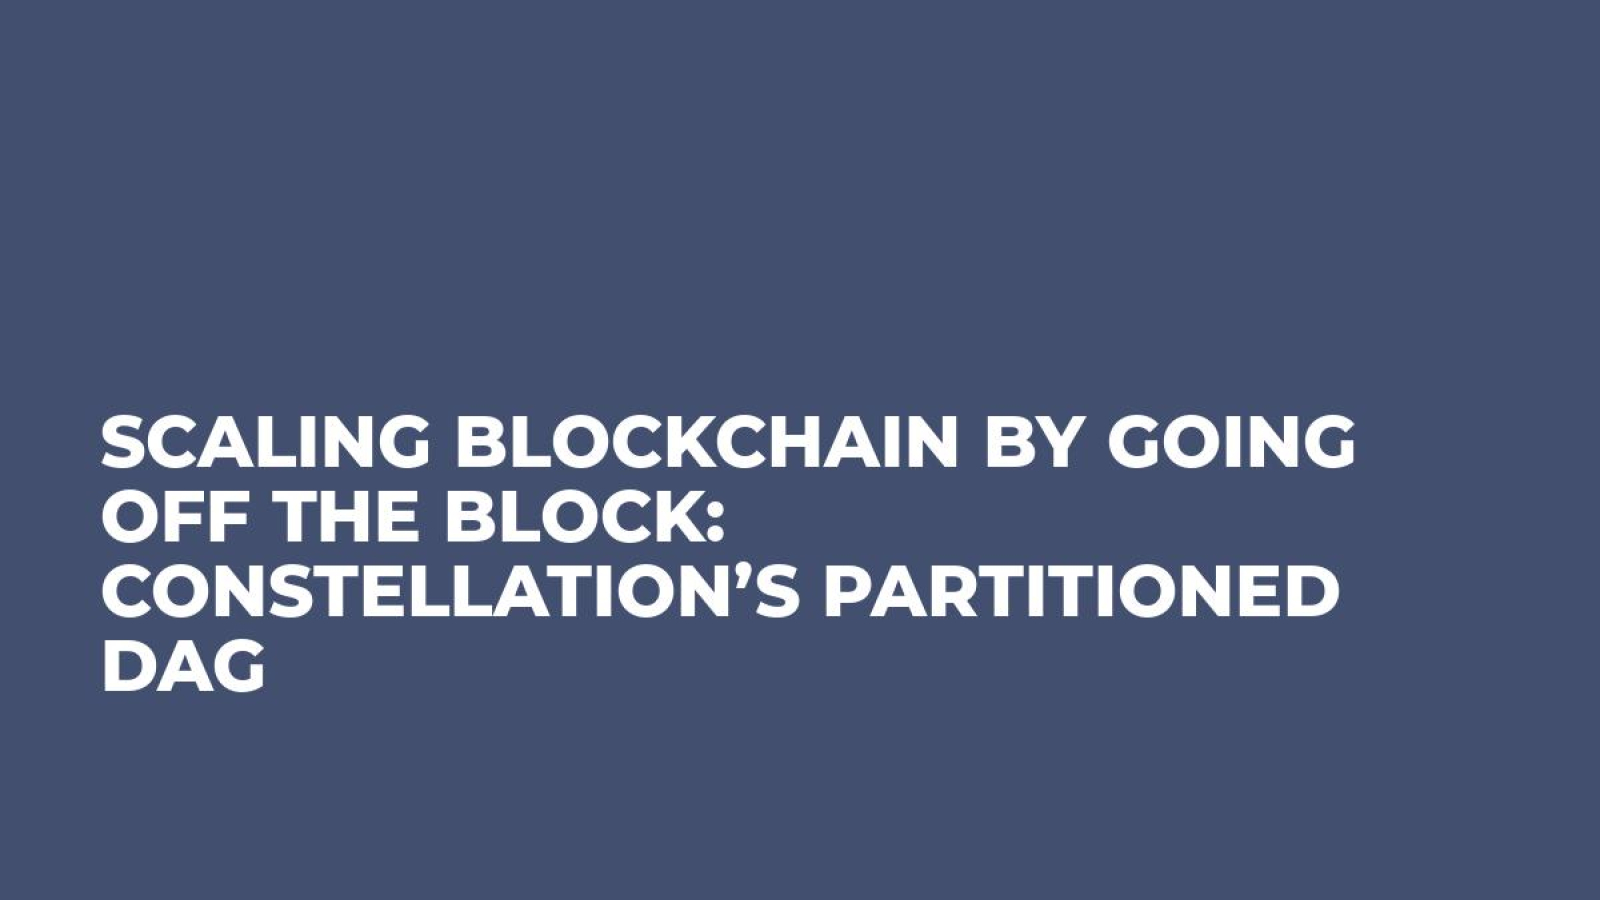 Scaling Blockchain by Going off the Block: Constellation’s Partitioned DAG